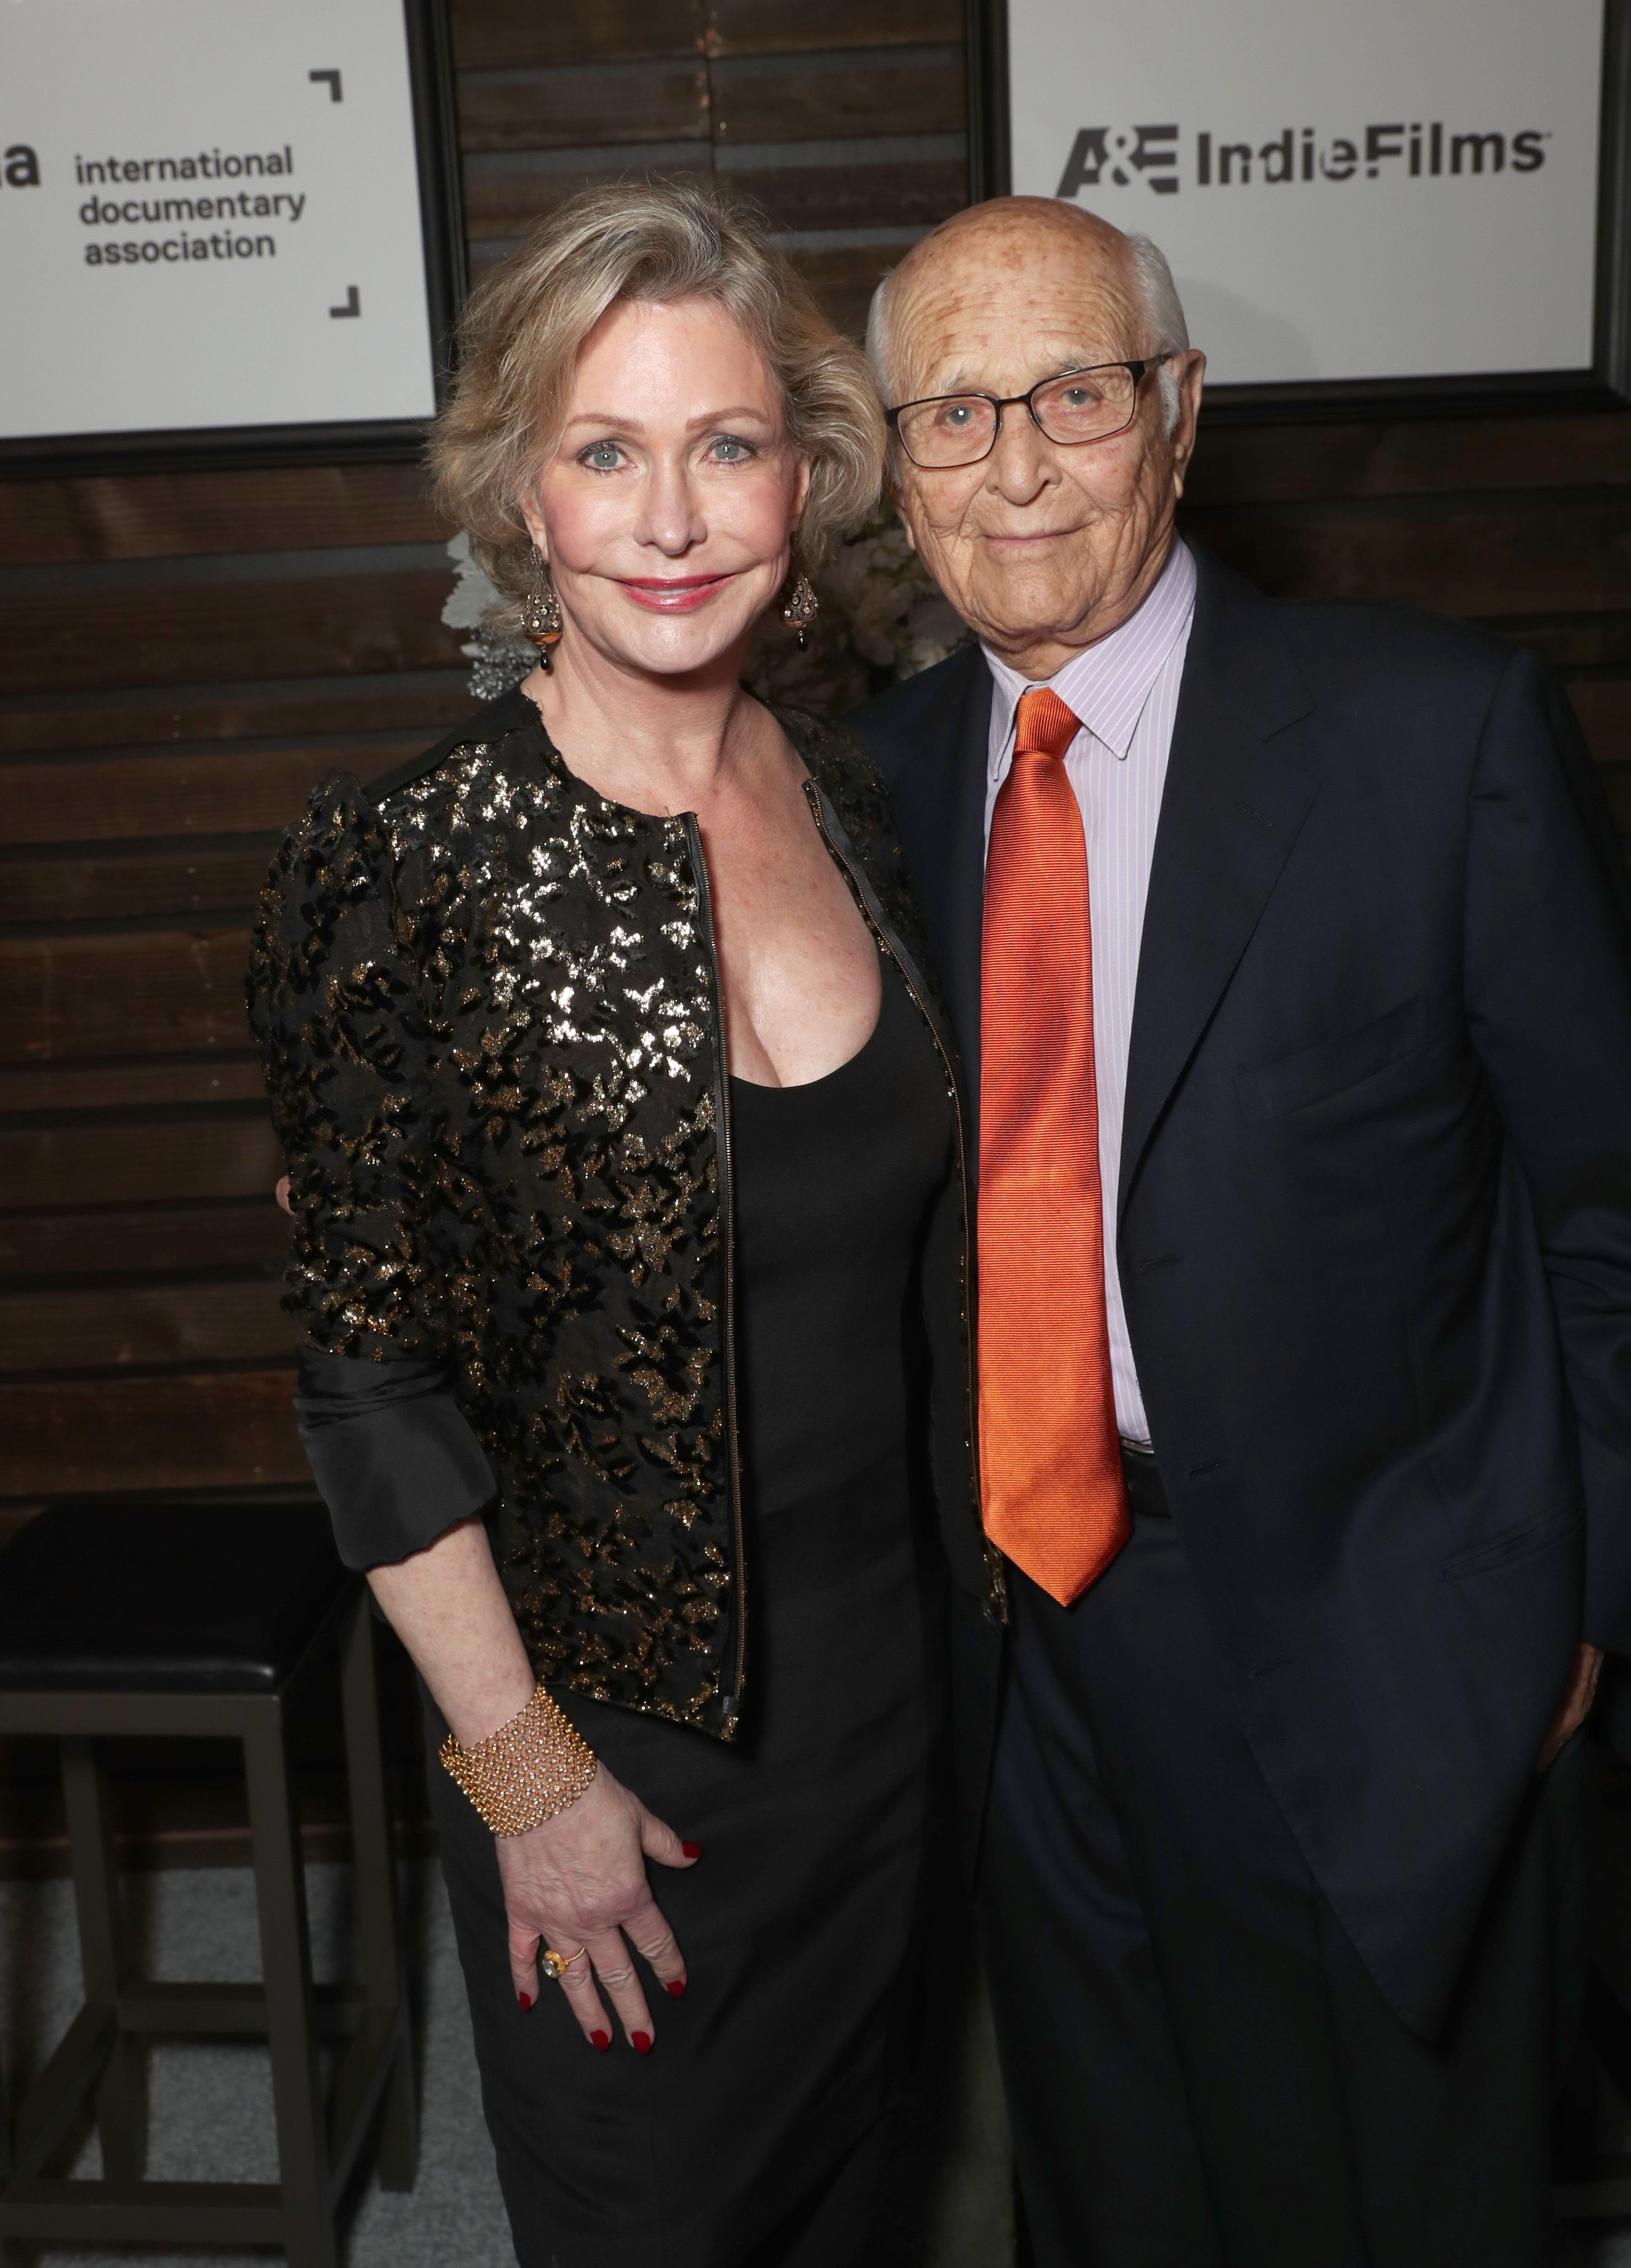 Lyn and Norman Lear at the 32nd Annual IDA Documentary Awards on December 9, 2016, in Hollywood, California | Photo: Todd Williamson/Getty Images